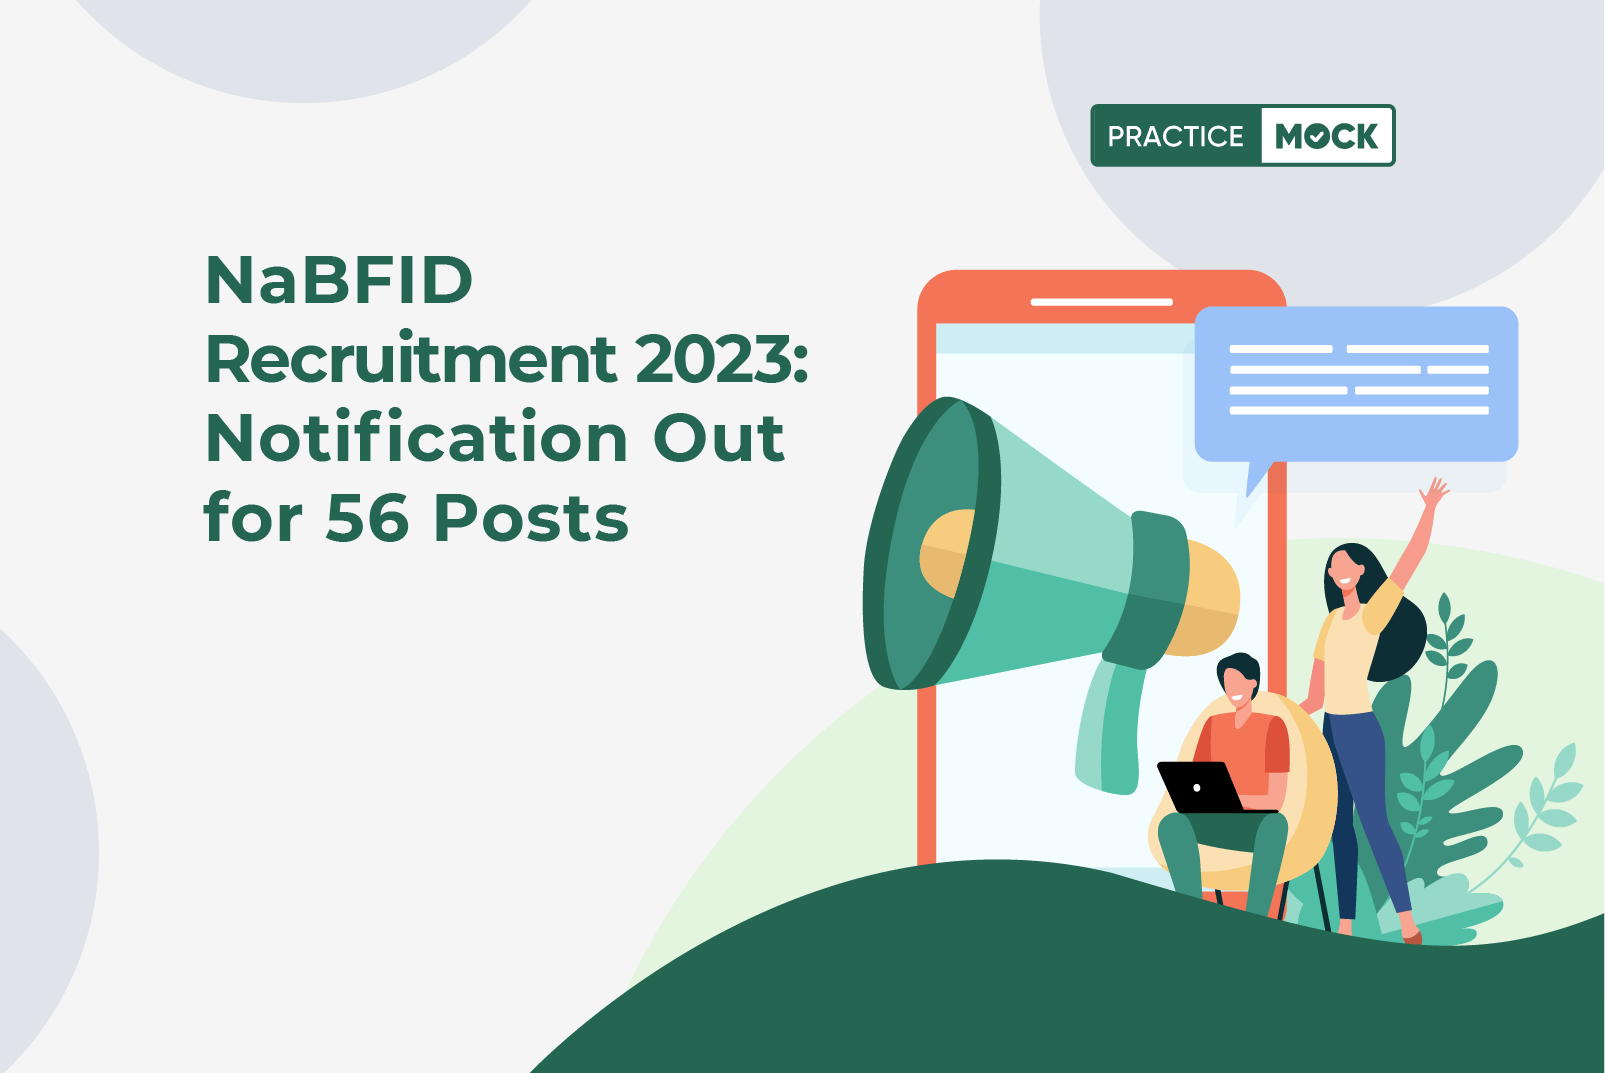 NaBFID Recruitment 2023 Notification Out for 56 Posts